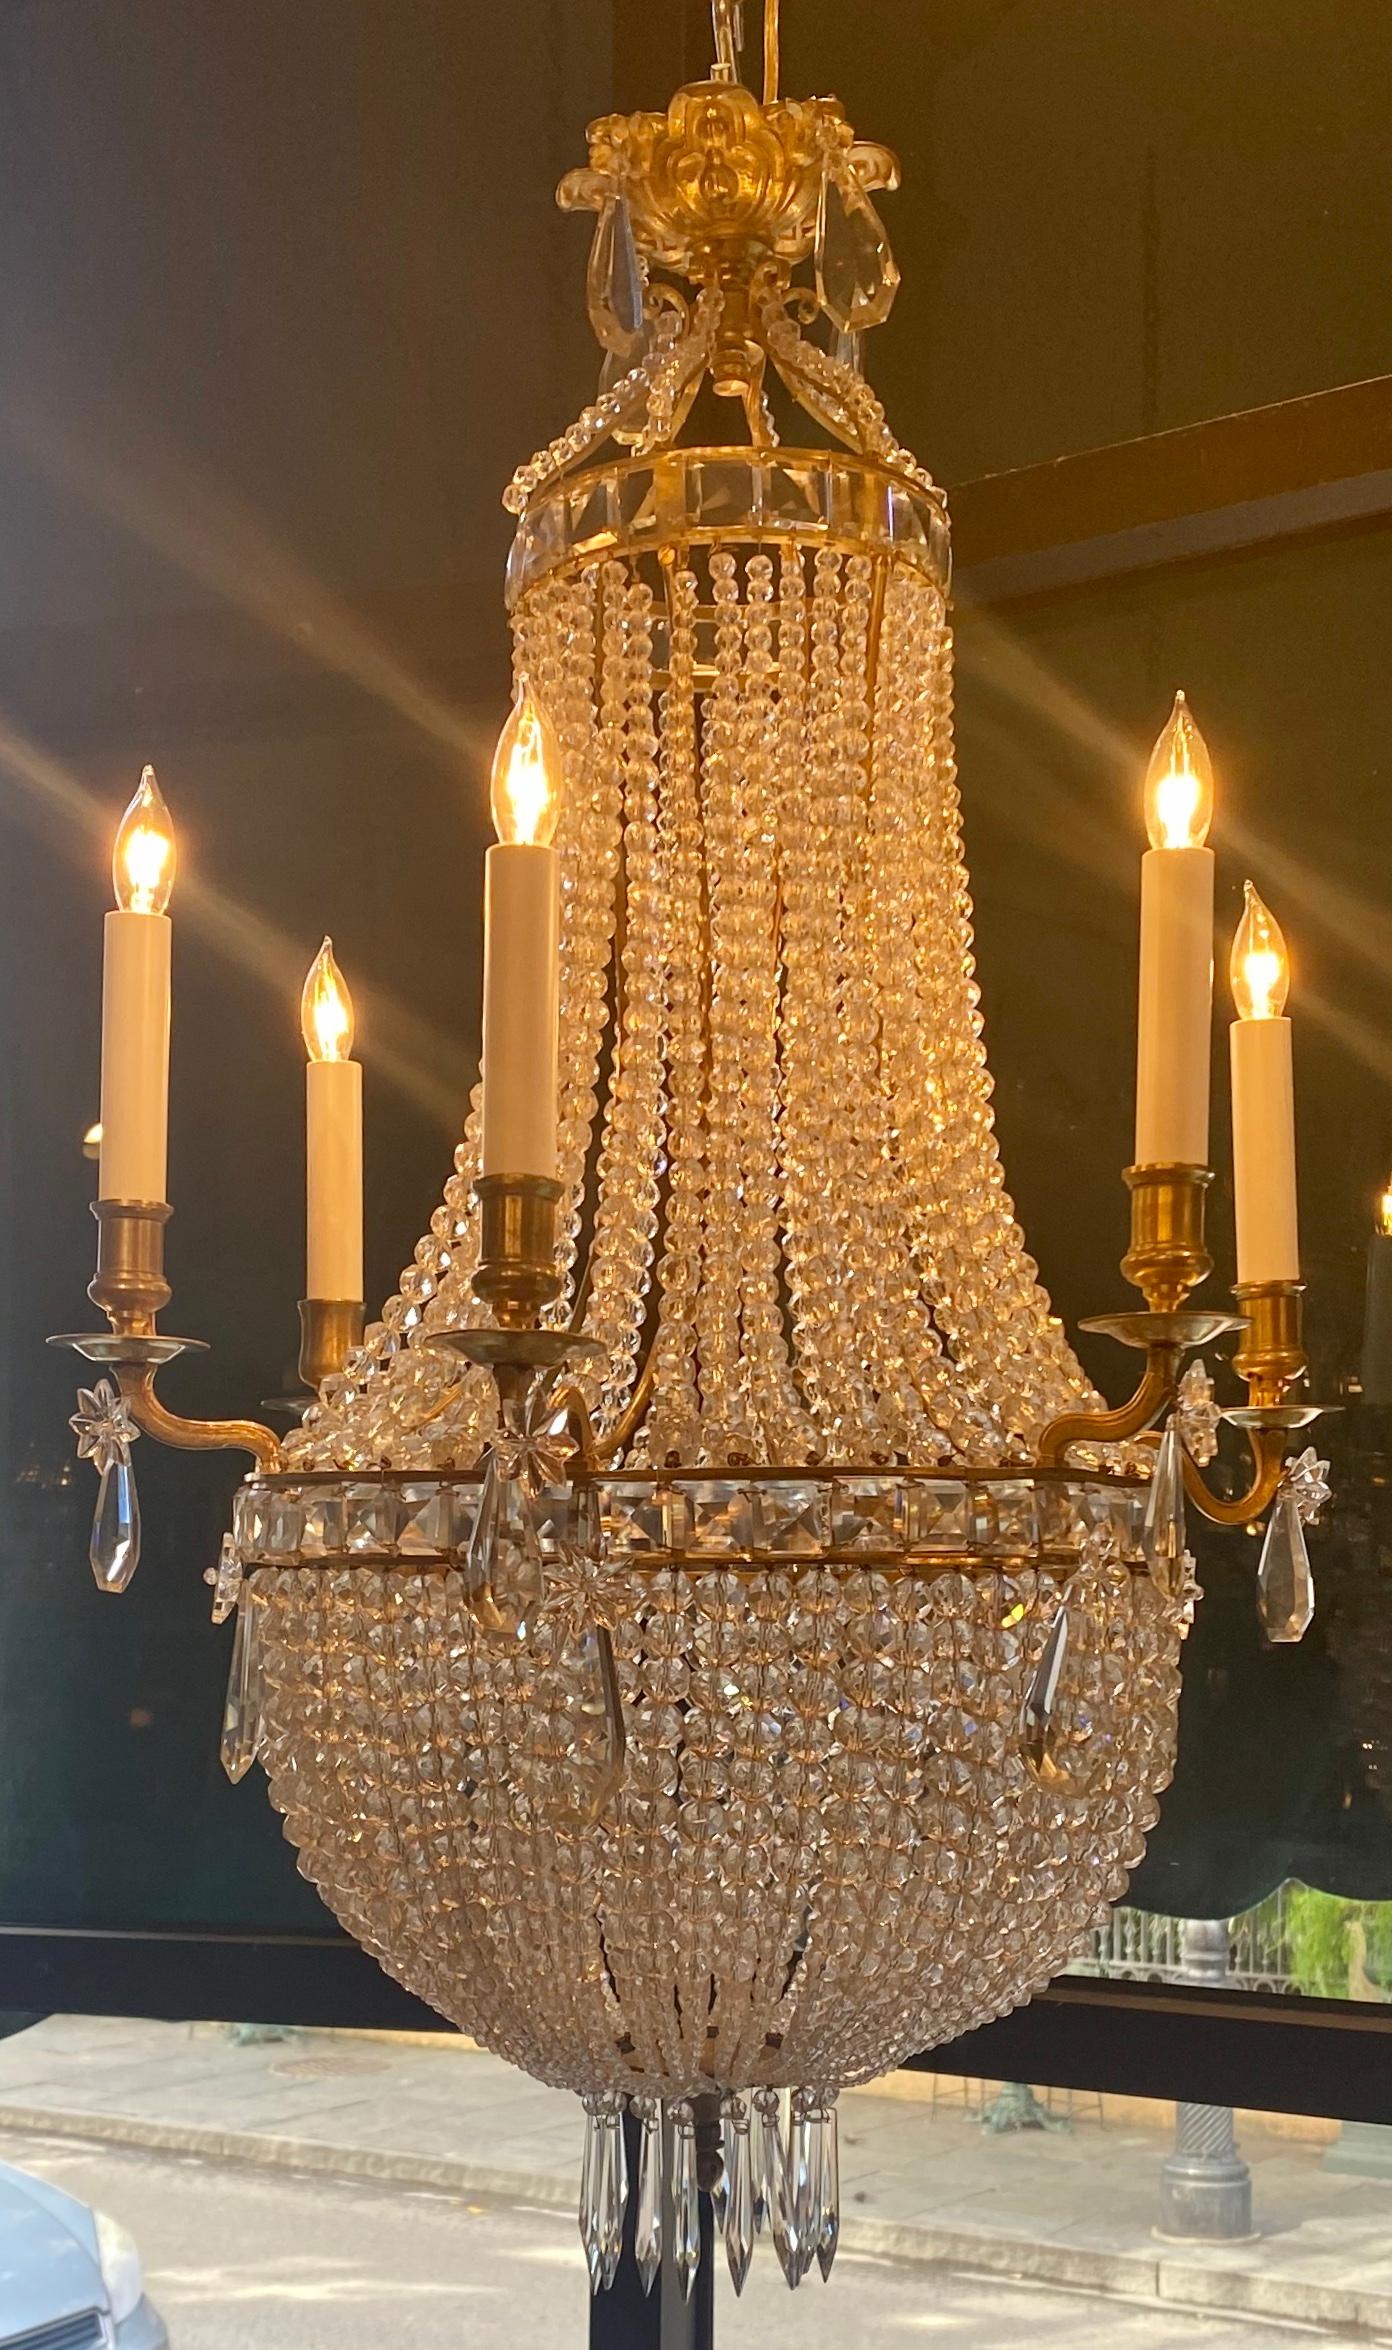 Antique French gold bronze and Baccarat beaded chandelier, circa 1890s.
CHC313.